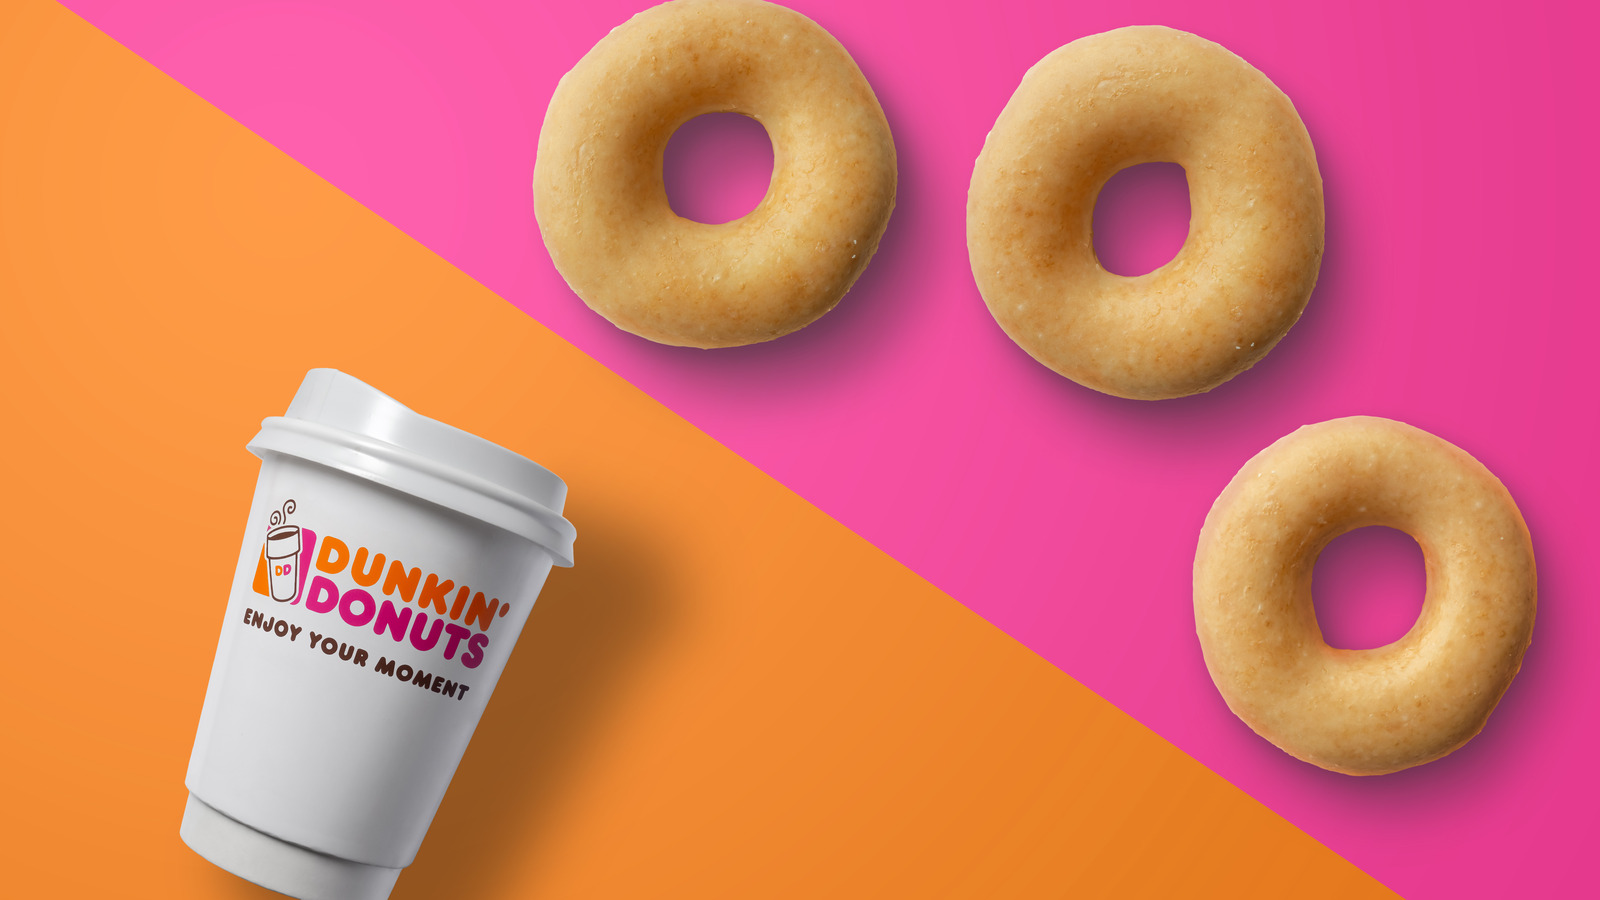 Dunkin Donuts Employee Just Shared Delicious Upcoming Coffee Flavor